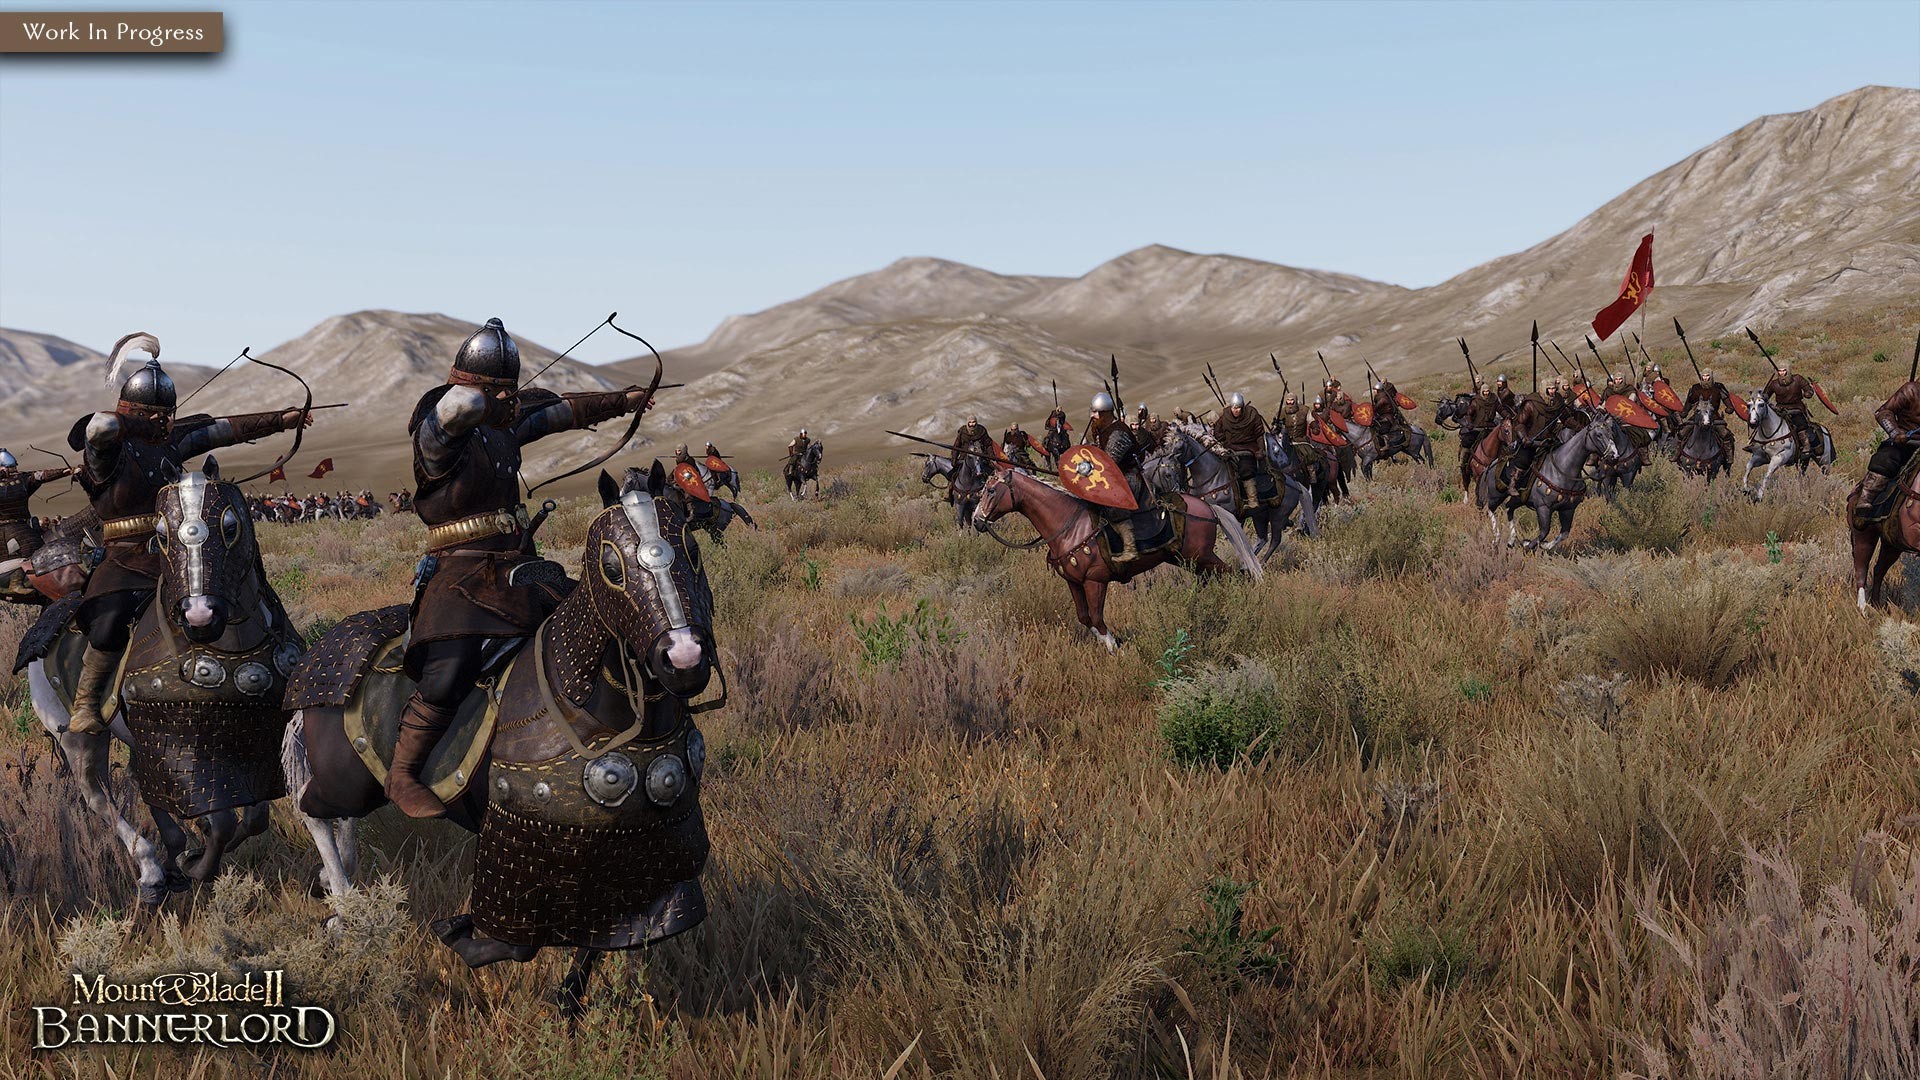 Mount & Blade II: Bannerlord Images 